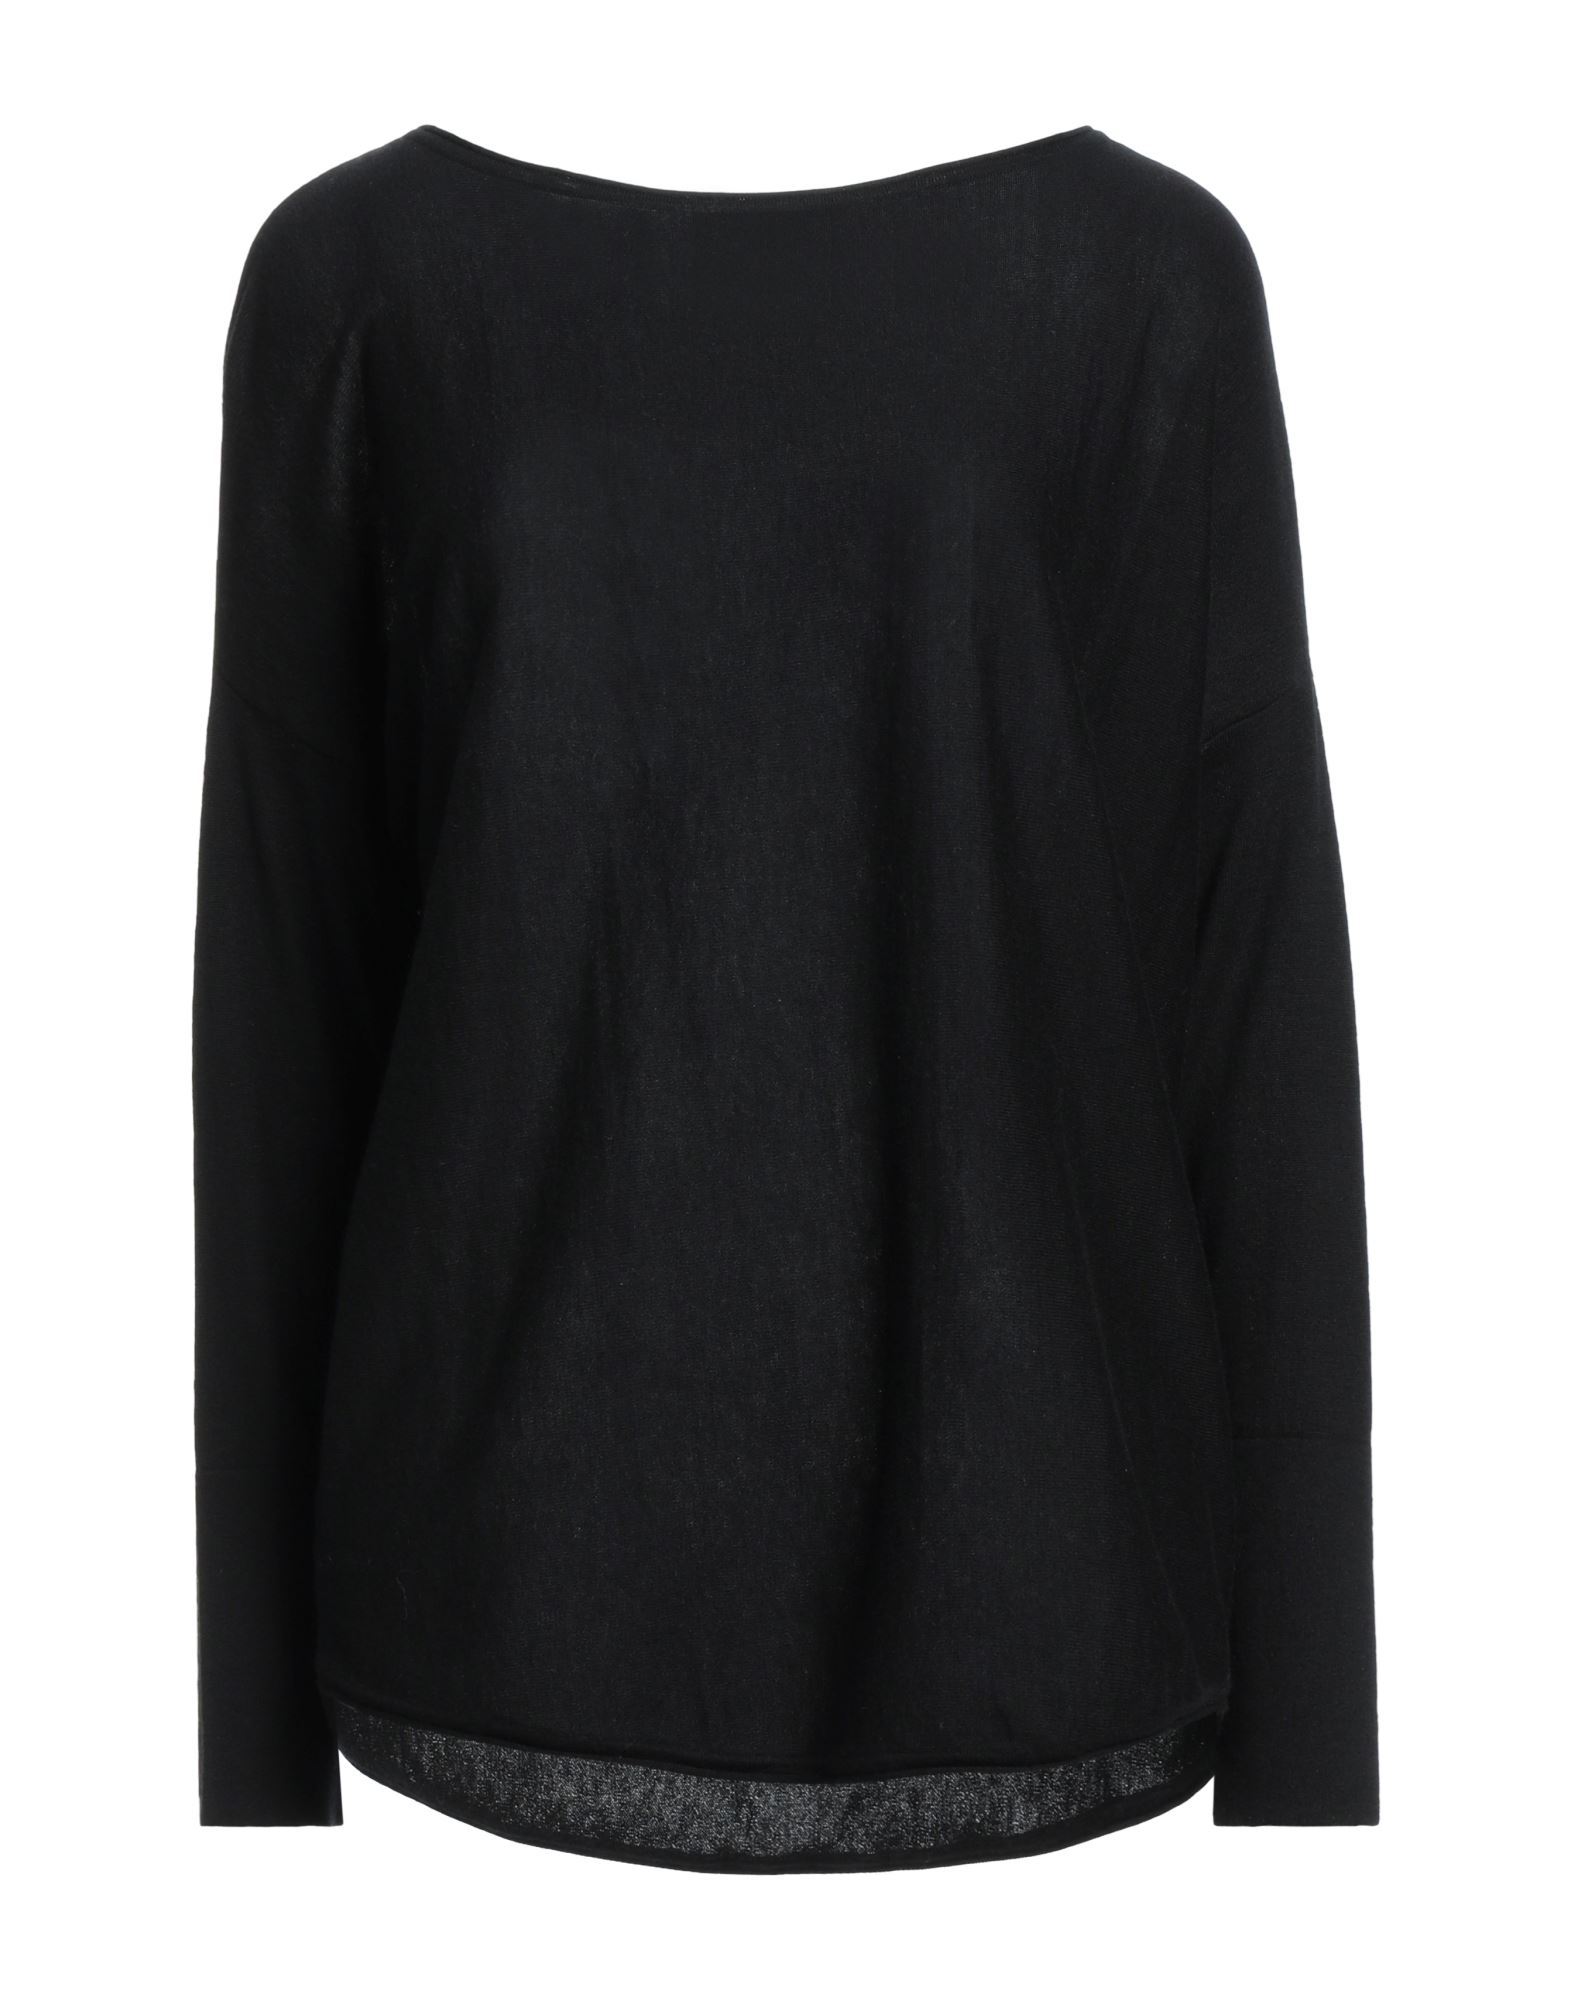 Shop Snobby Sheep Woman Sweater Black Size 4 Silk, Cashmere